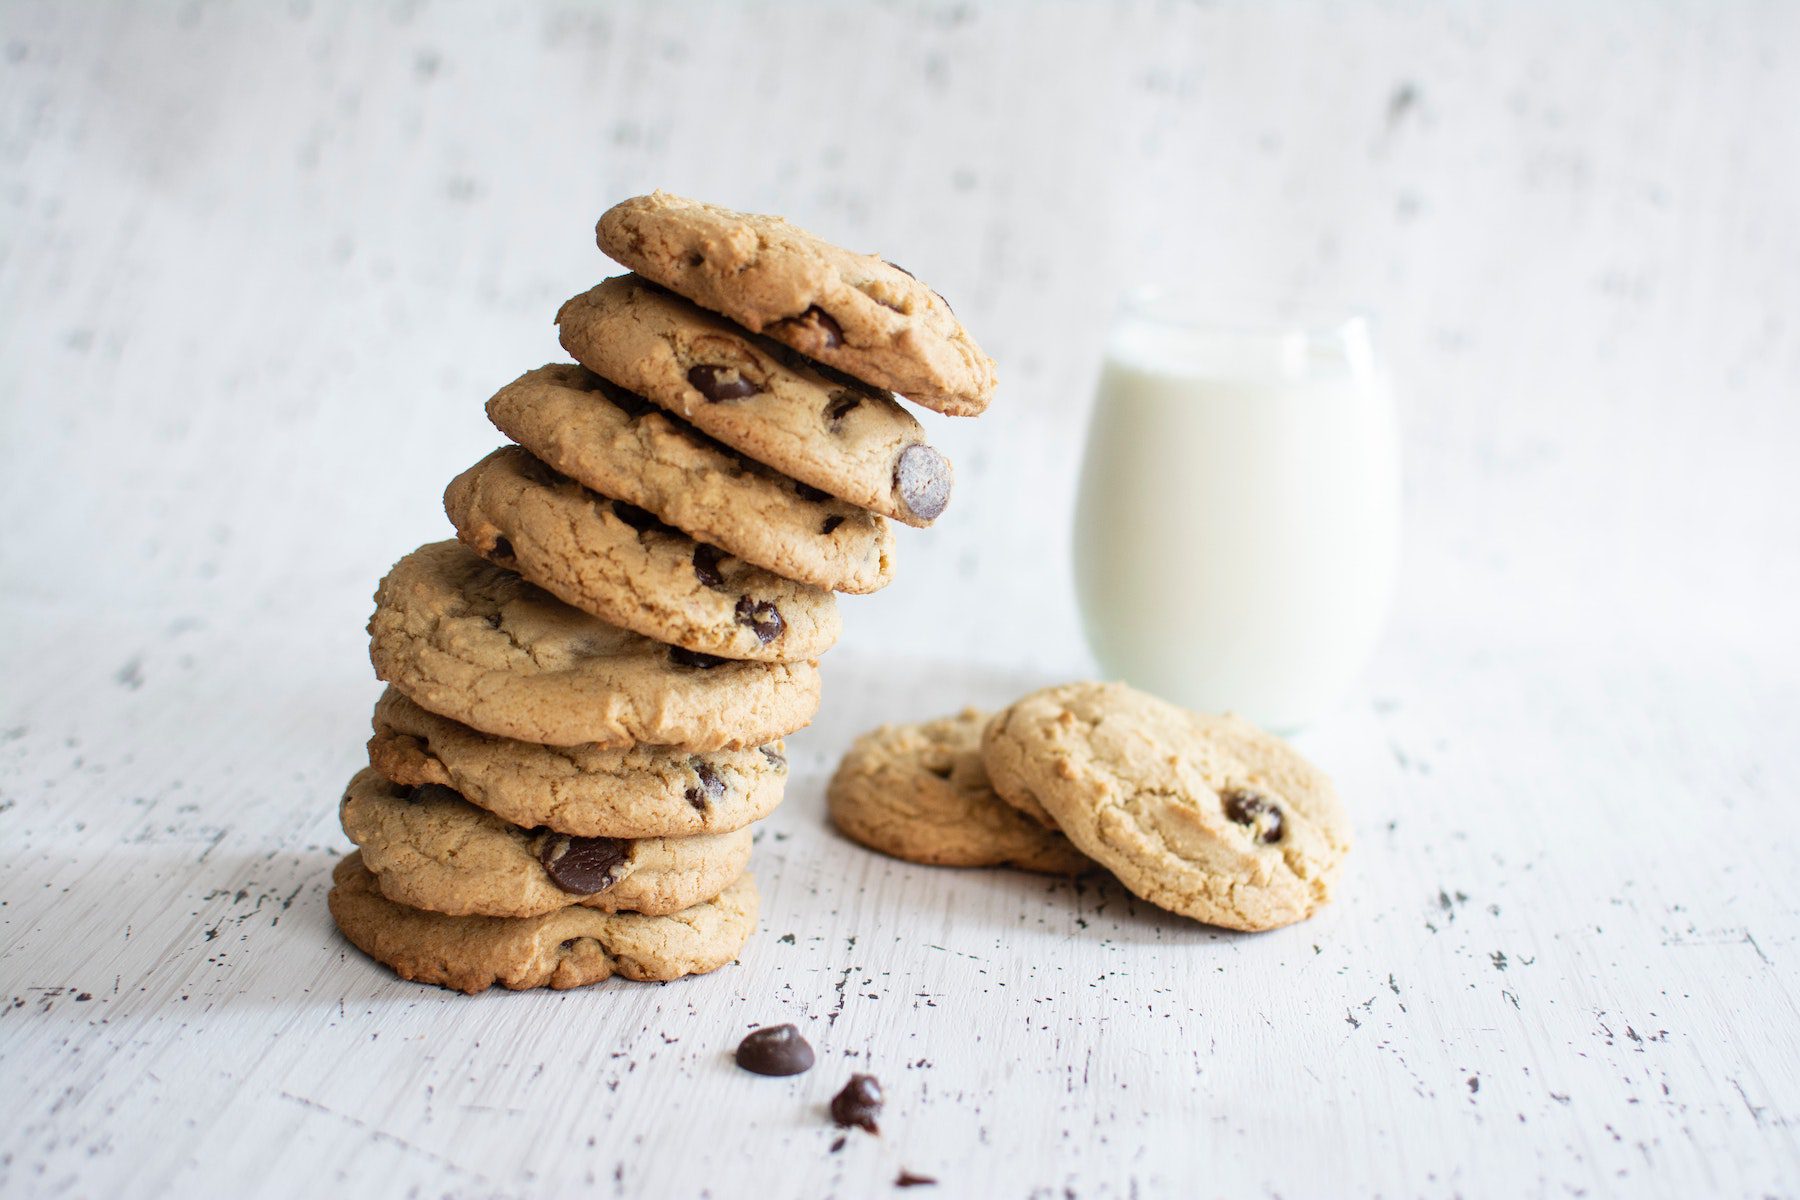 A leaning tower of vegetarian chocolate chip cookies on speckled background with a glass of milk nearby.